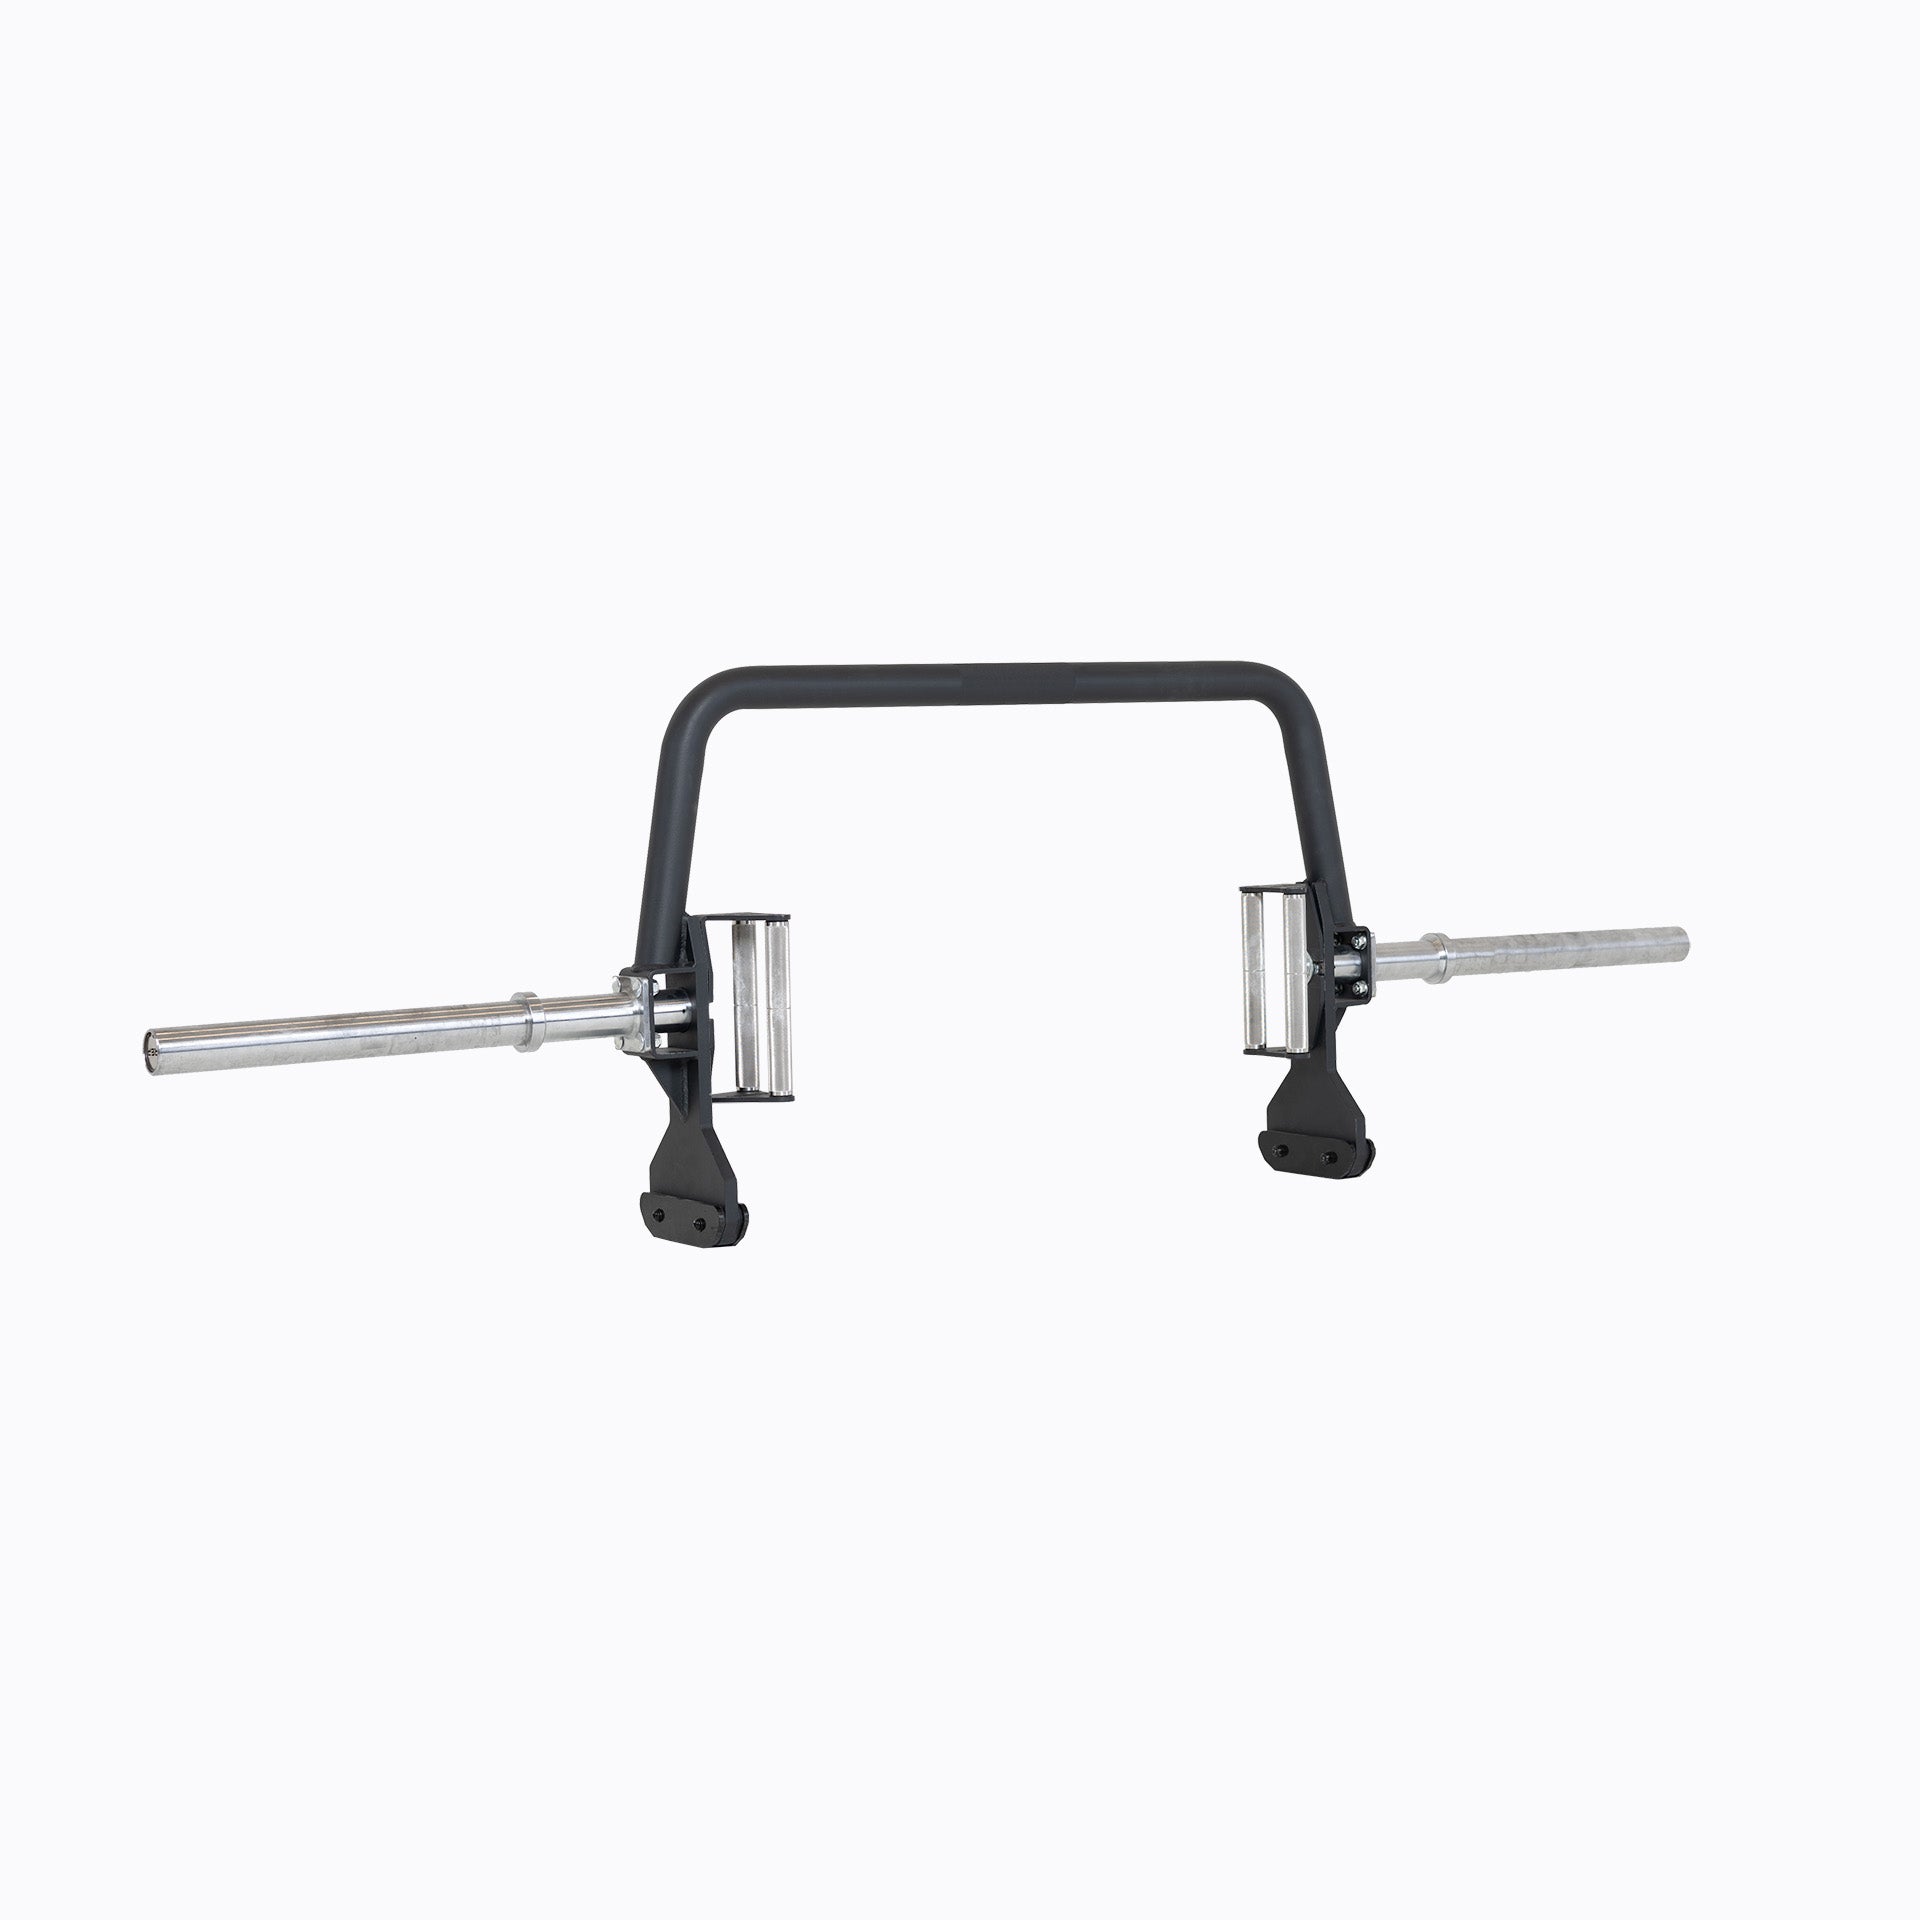 Open Trap Bar with wide handles standing vertically on its integrated deadlift jack.